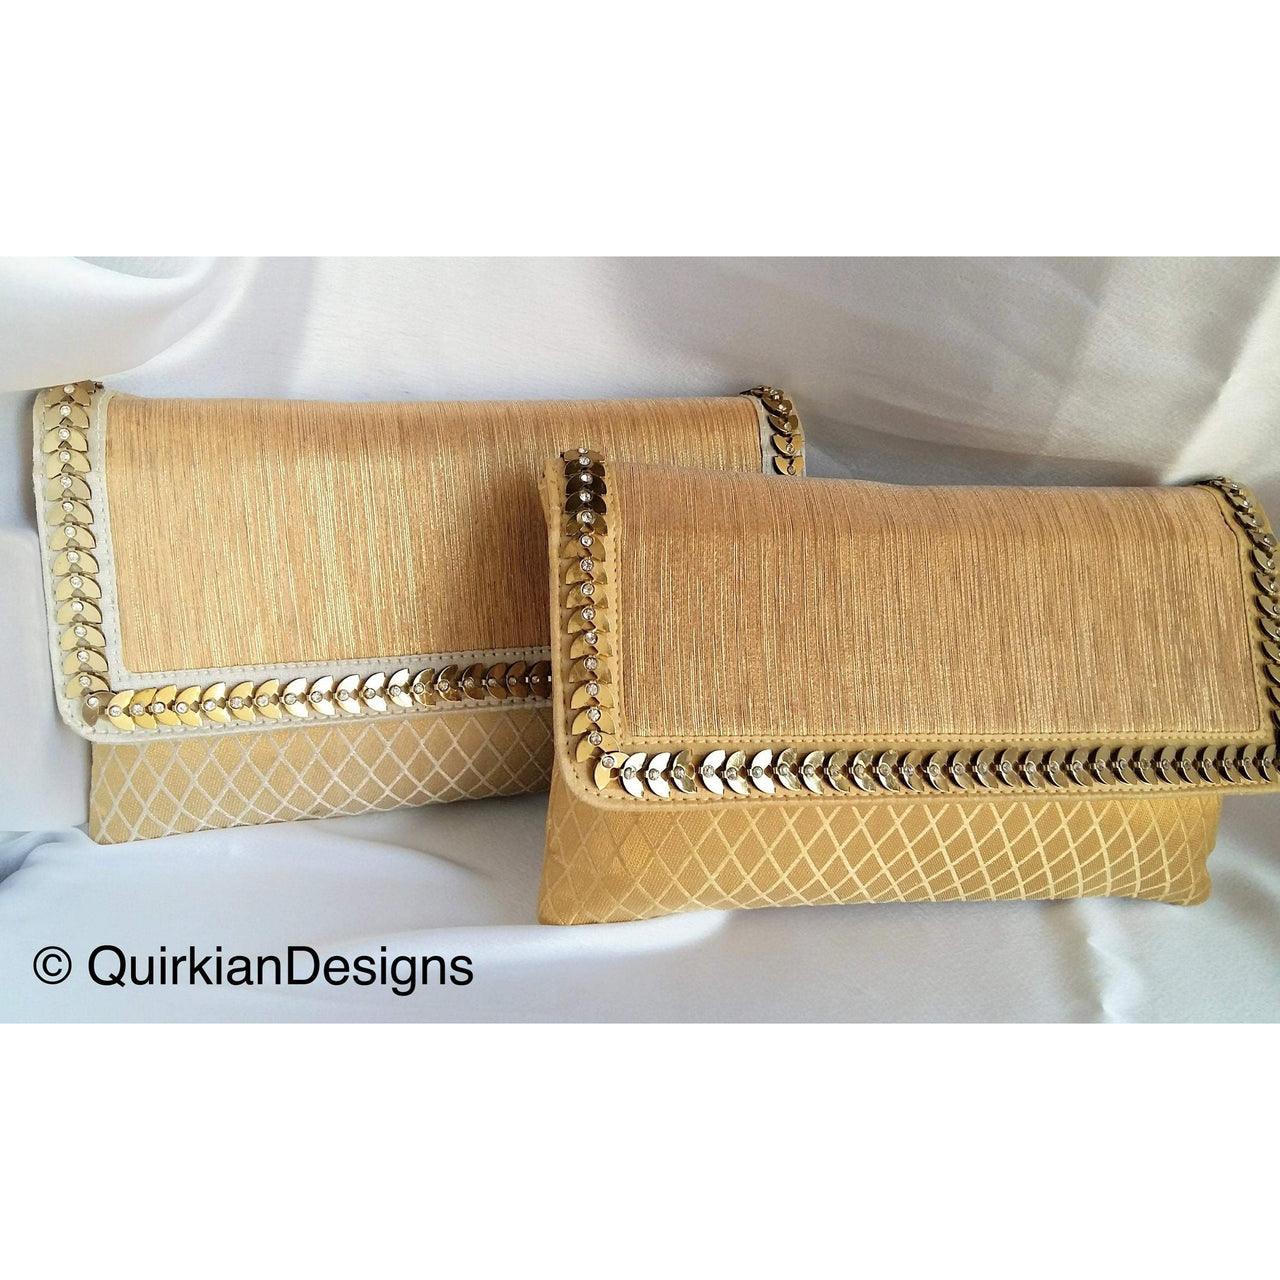 Beige And Copper Fabric Clutch Purse With Gold And Diamante Beads, Wedding Clutch, Party Bag